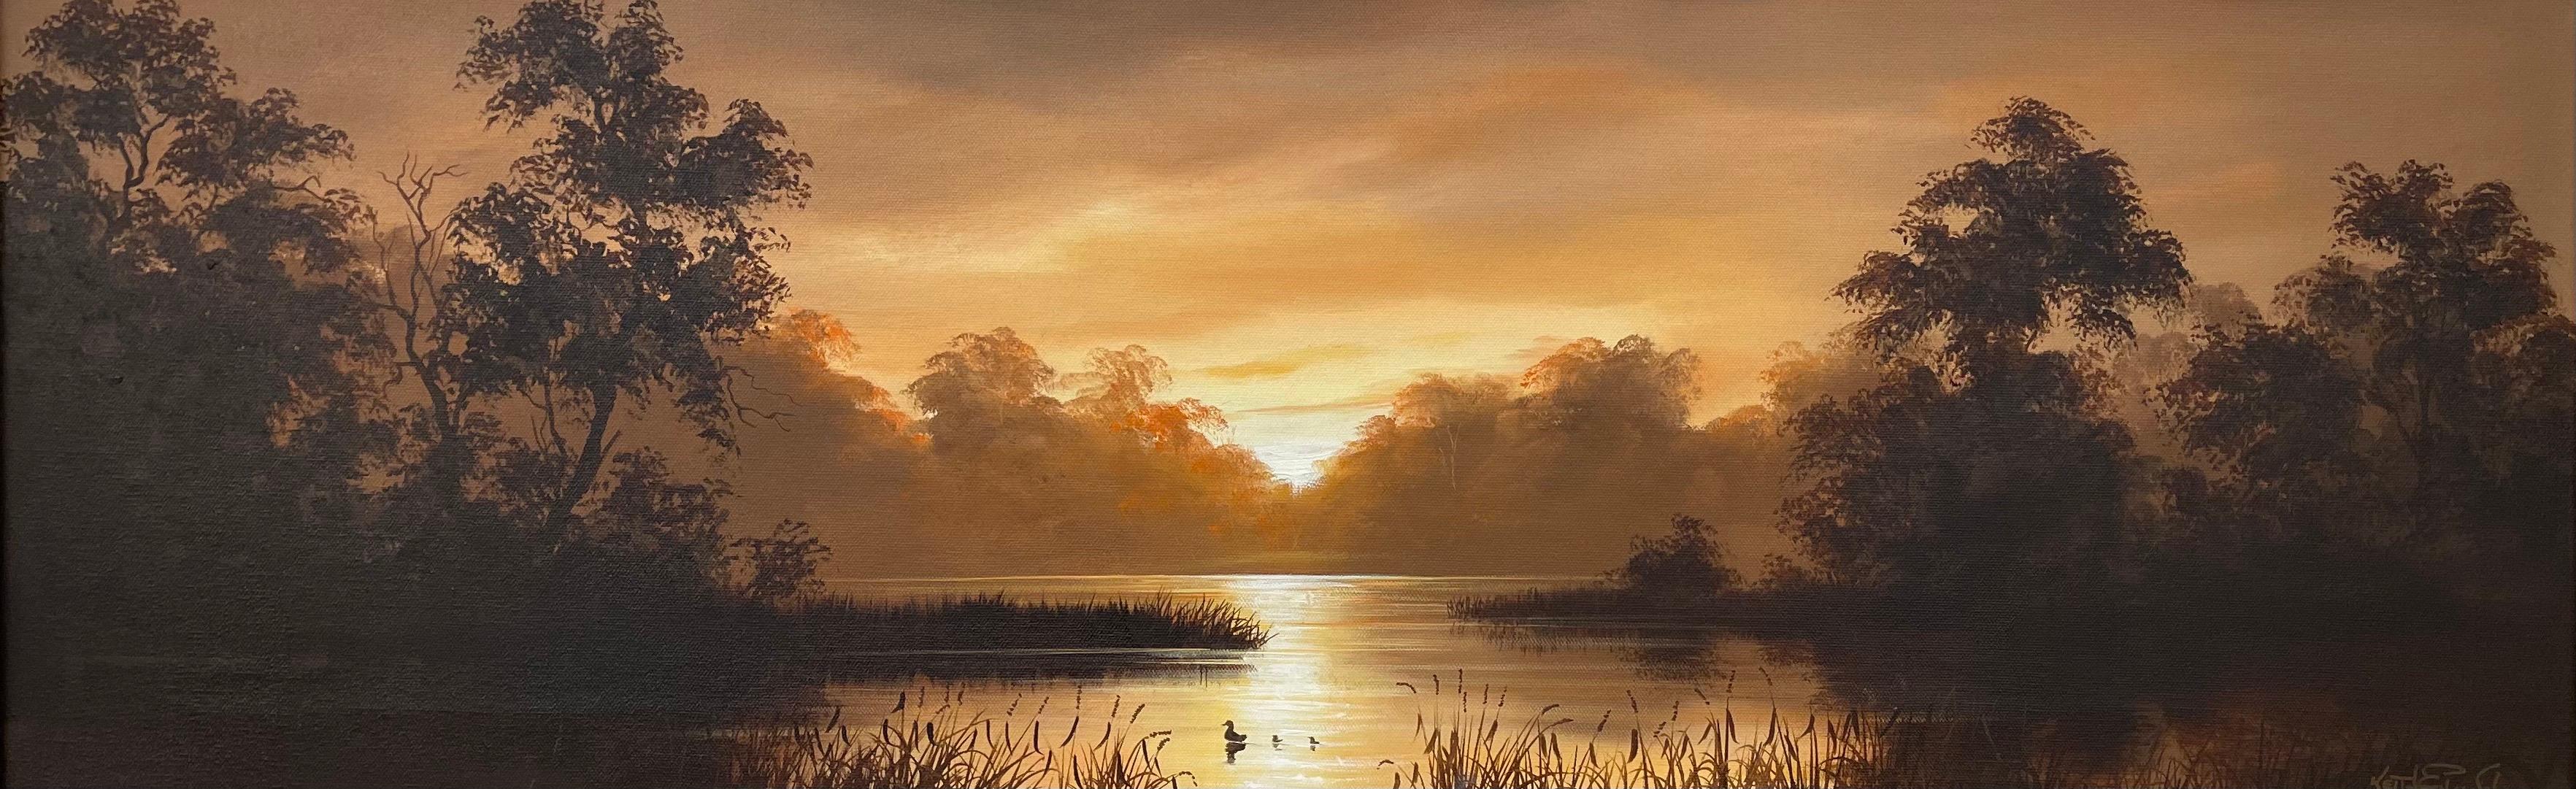 Oil Painting of River Sunset Landscape in Warm Brown Colours by British Artist 1